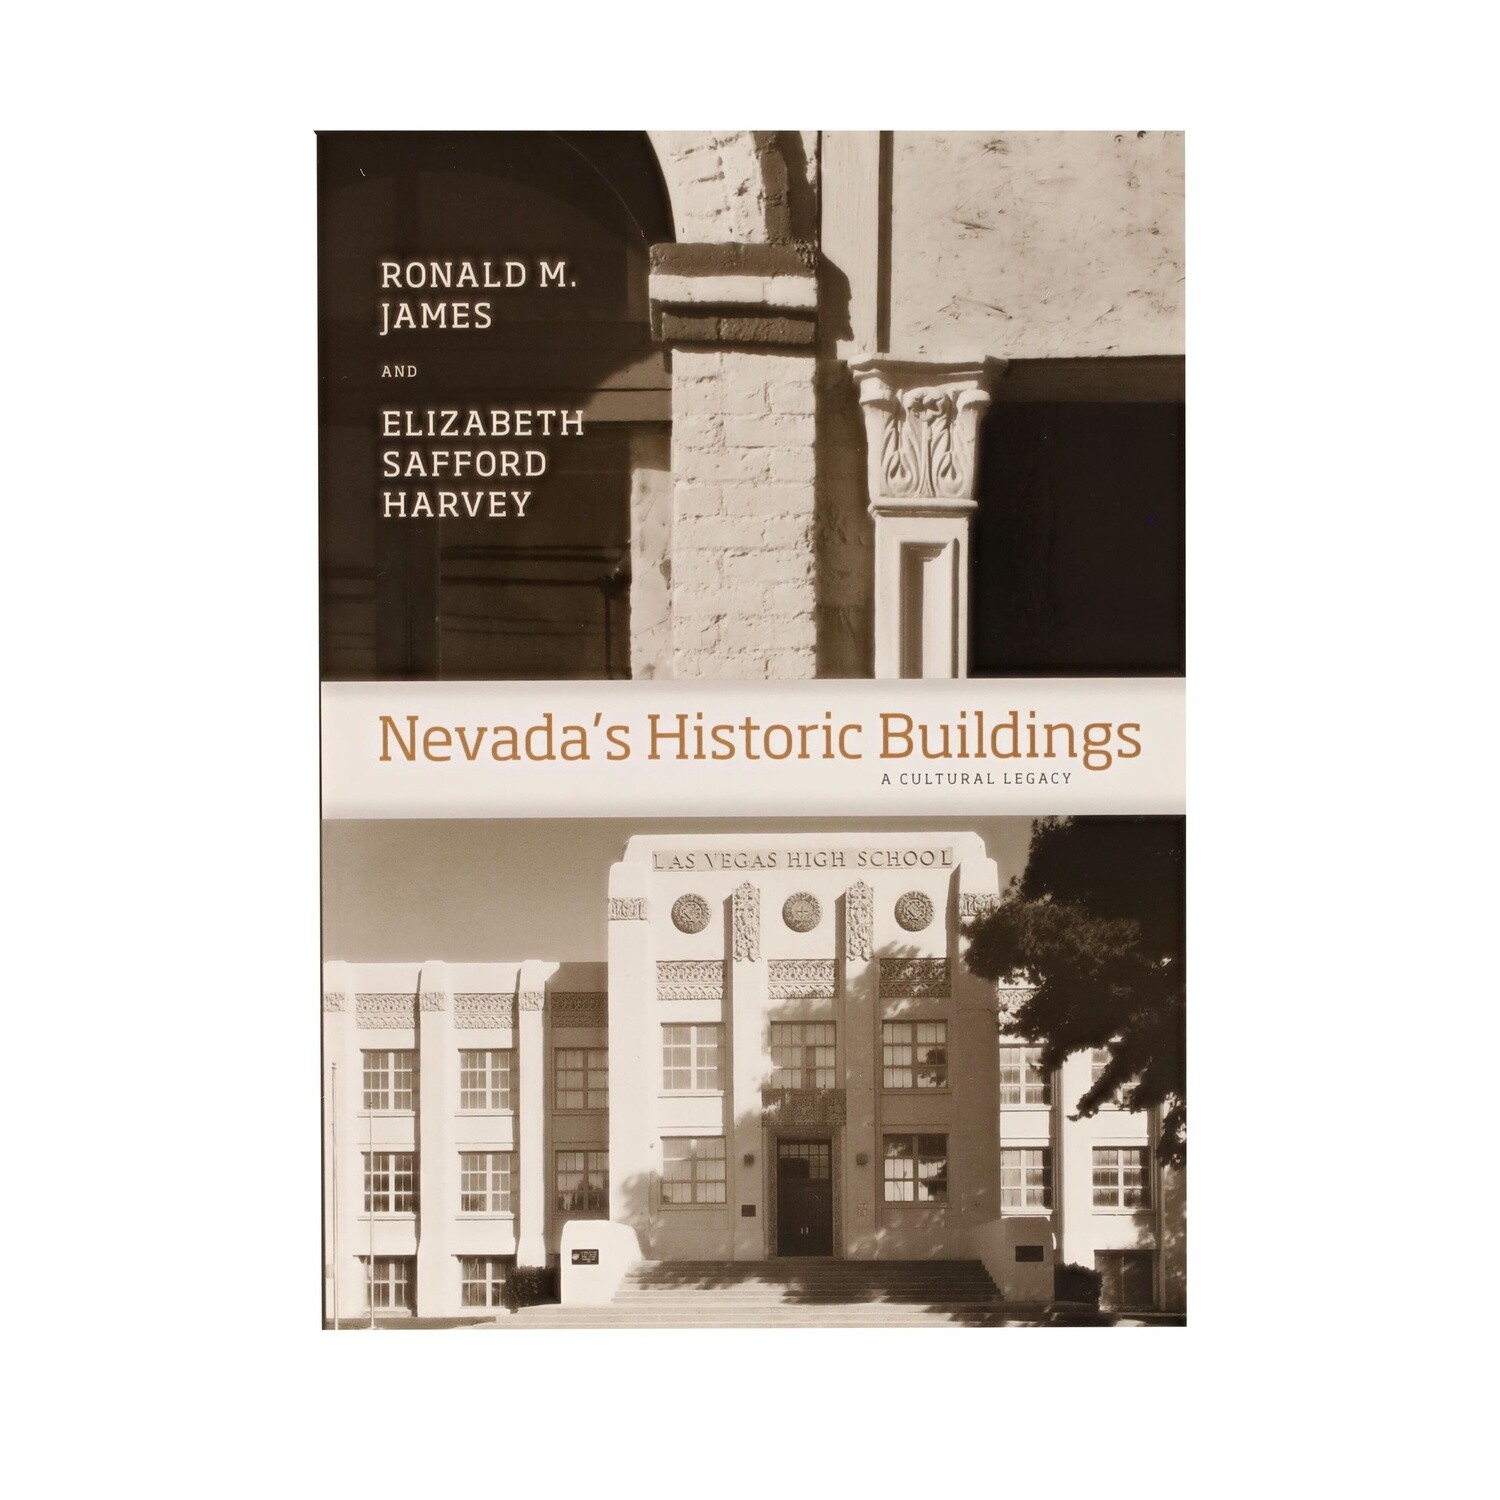 Nevada's Historic Buildings, A Cultural Legacy by Ronald M. James and Elizabeth Safford Harvey